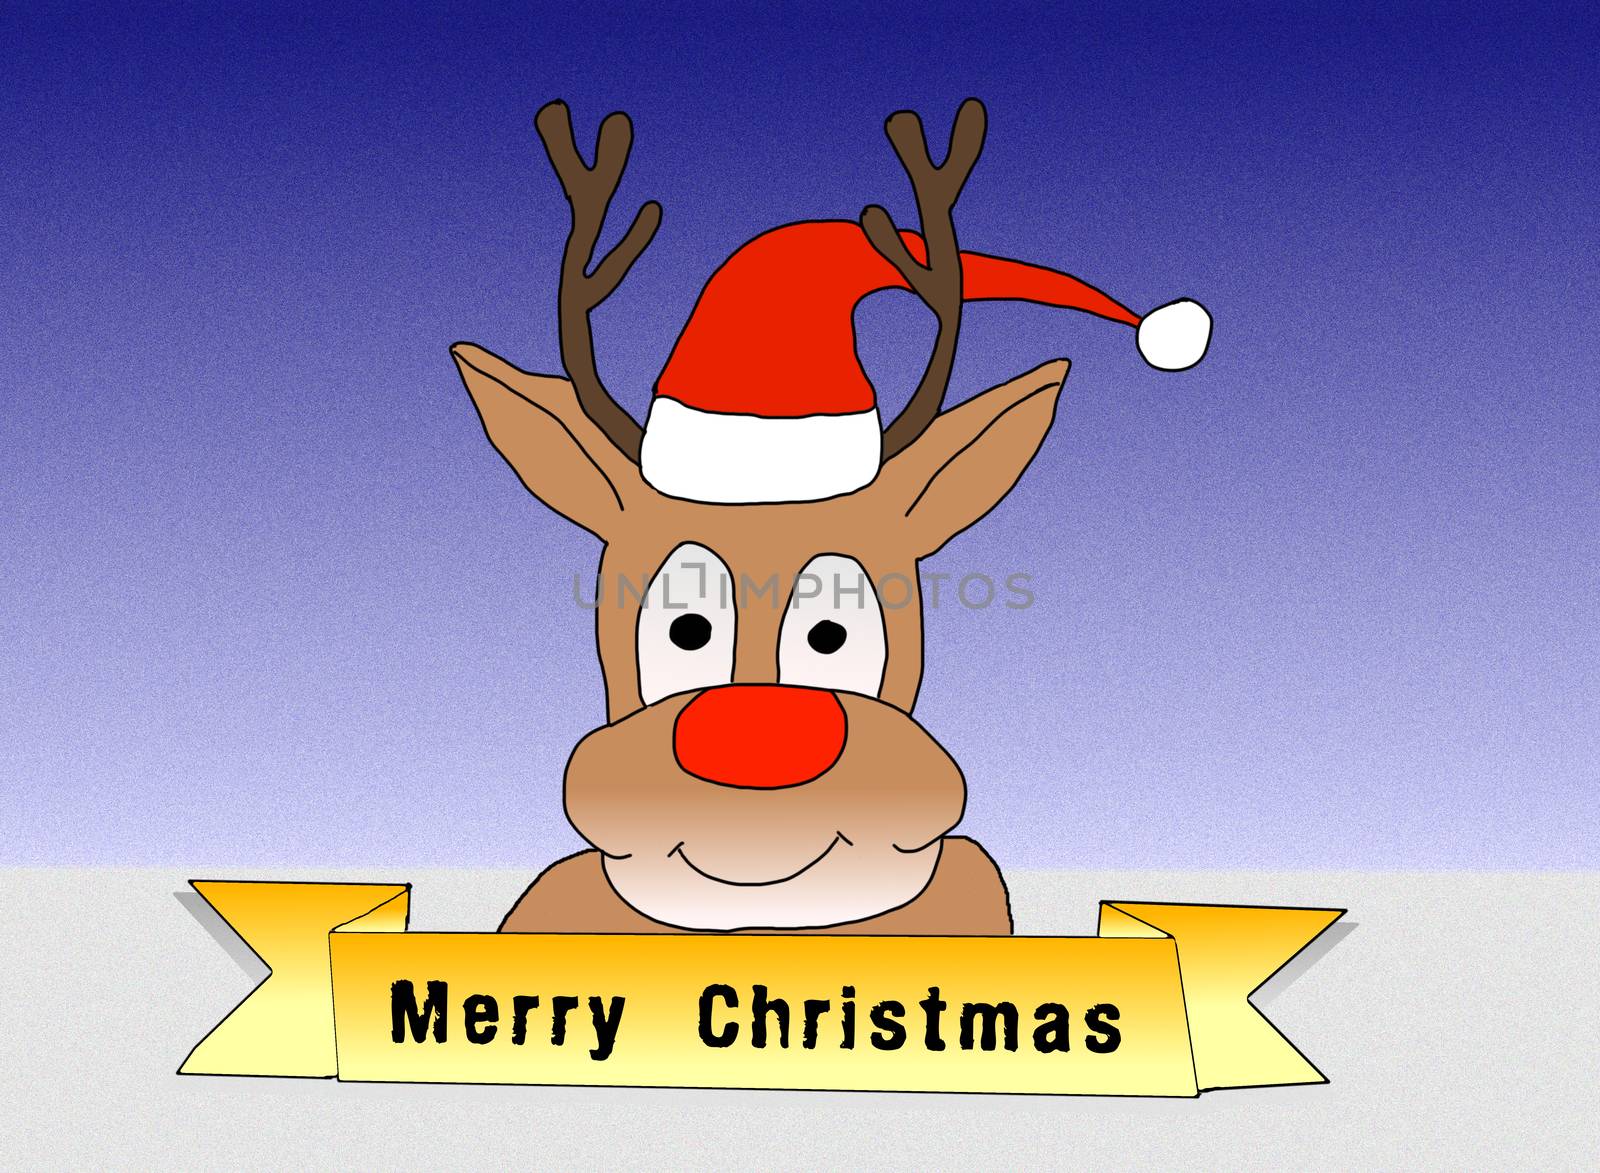 Illustration: Rudolph wishing Merry Christmas by gwolters